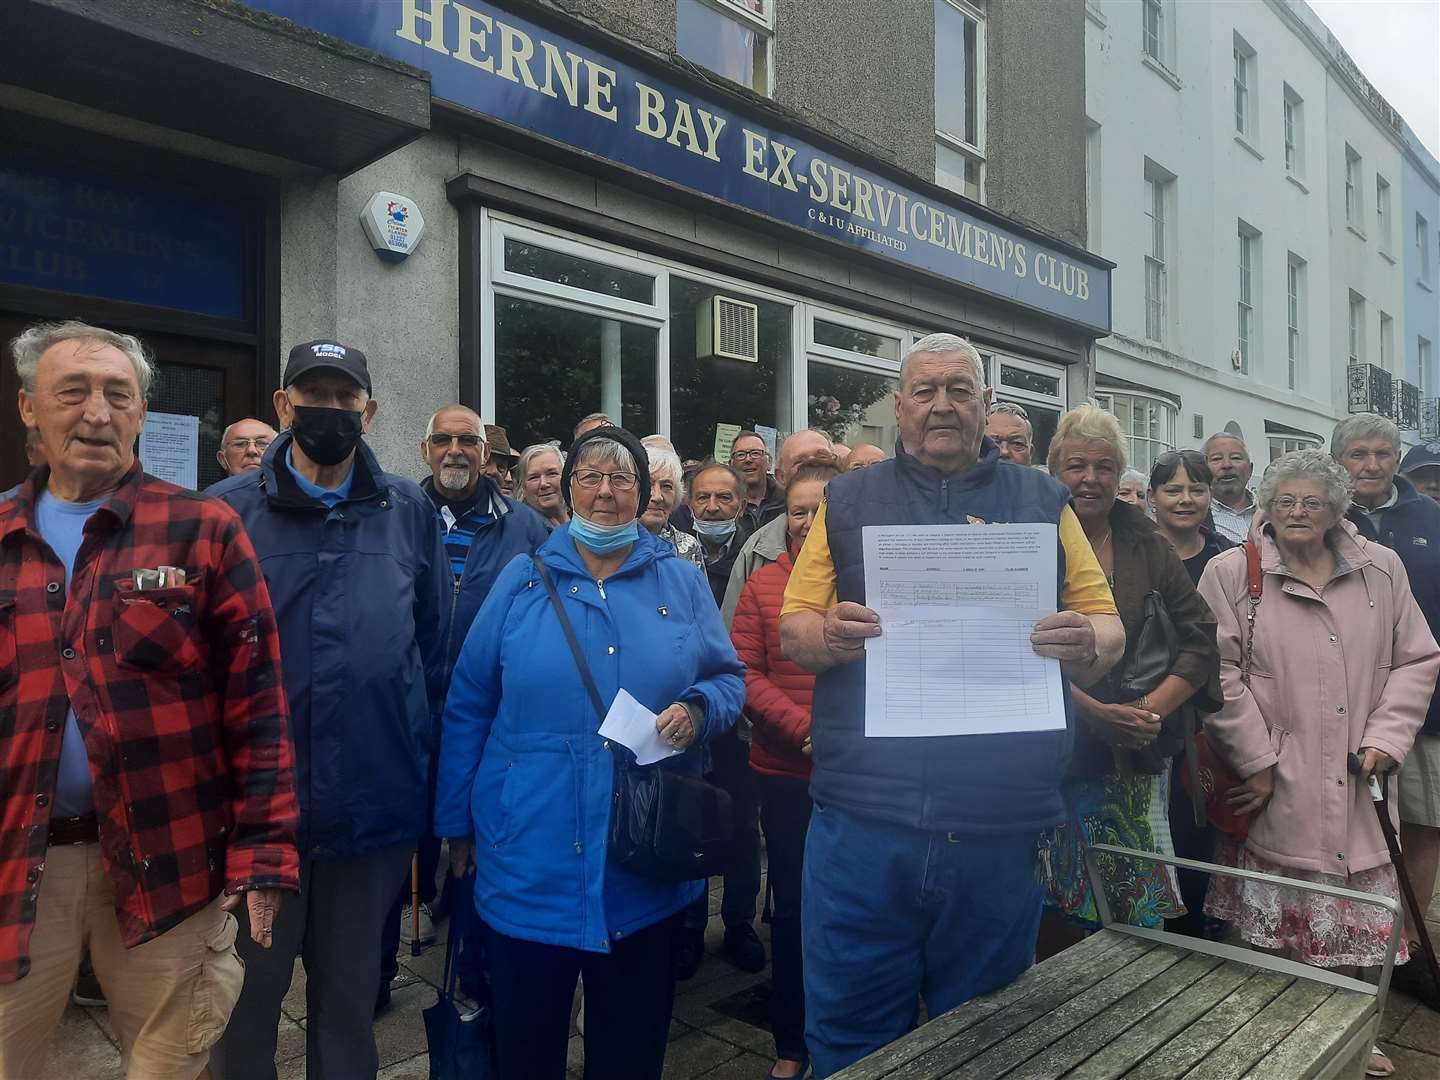 Members are campaigning to save the Ex-Servicemen's Club in Herne Bay, after bosses revealed it is at risk of closure